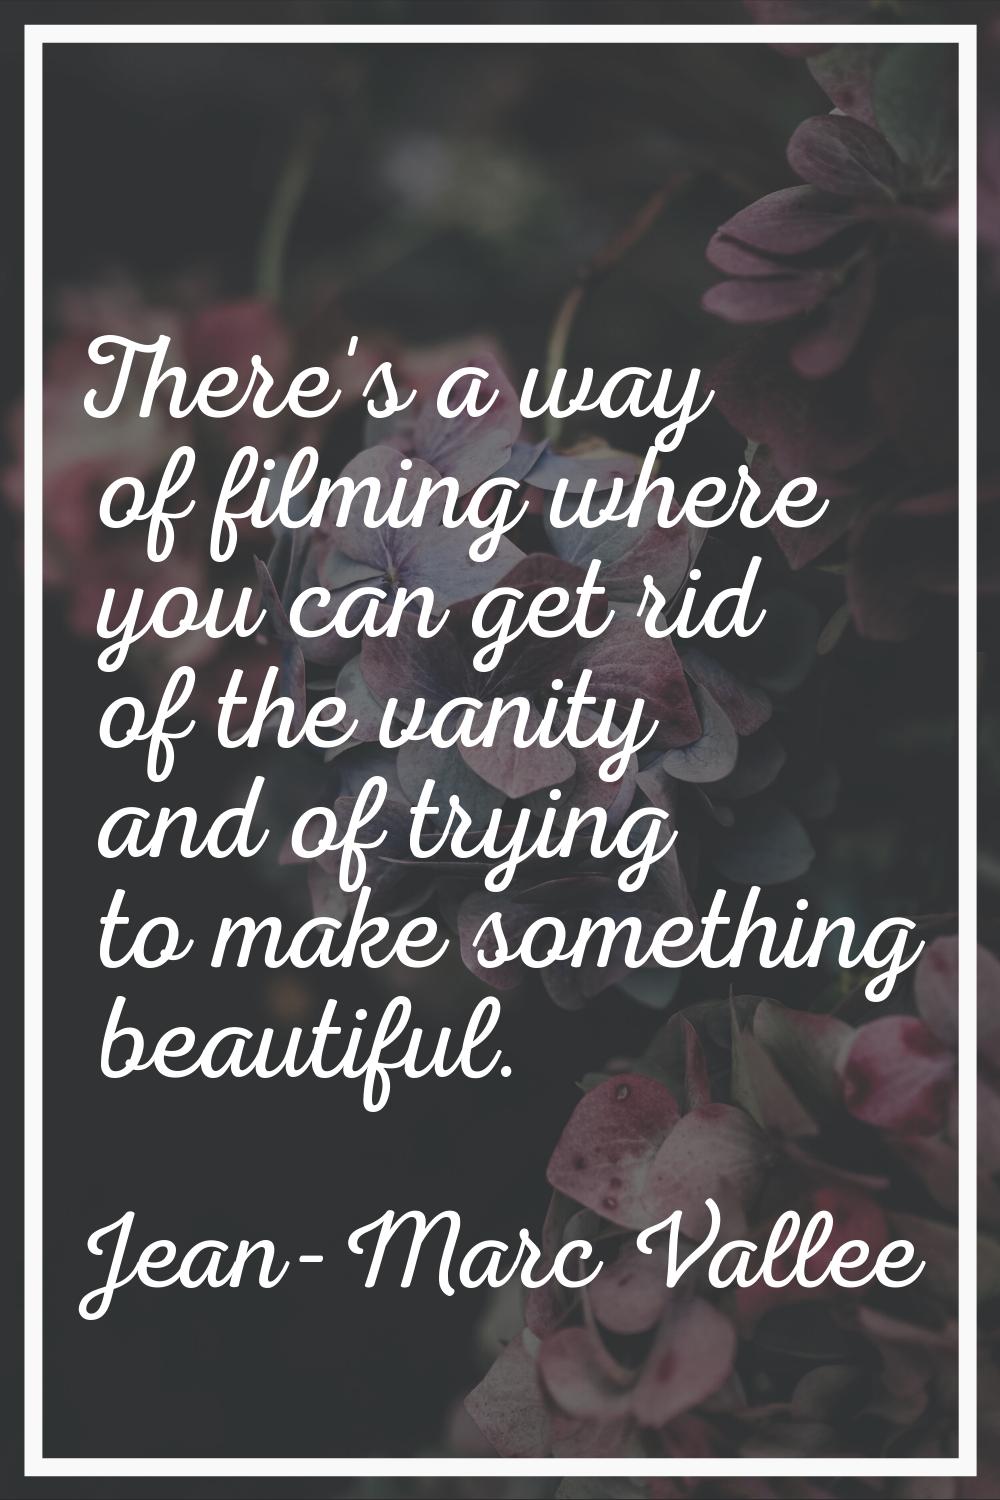 There's a way of filming where you can get rid of the vanity and of trying to make something beauti